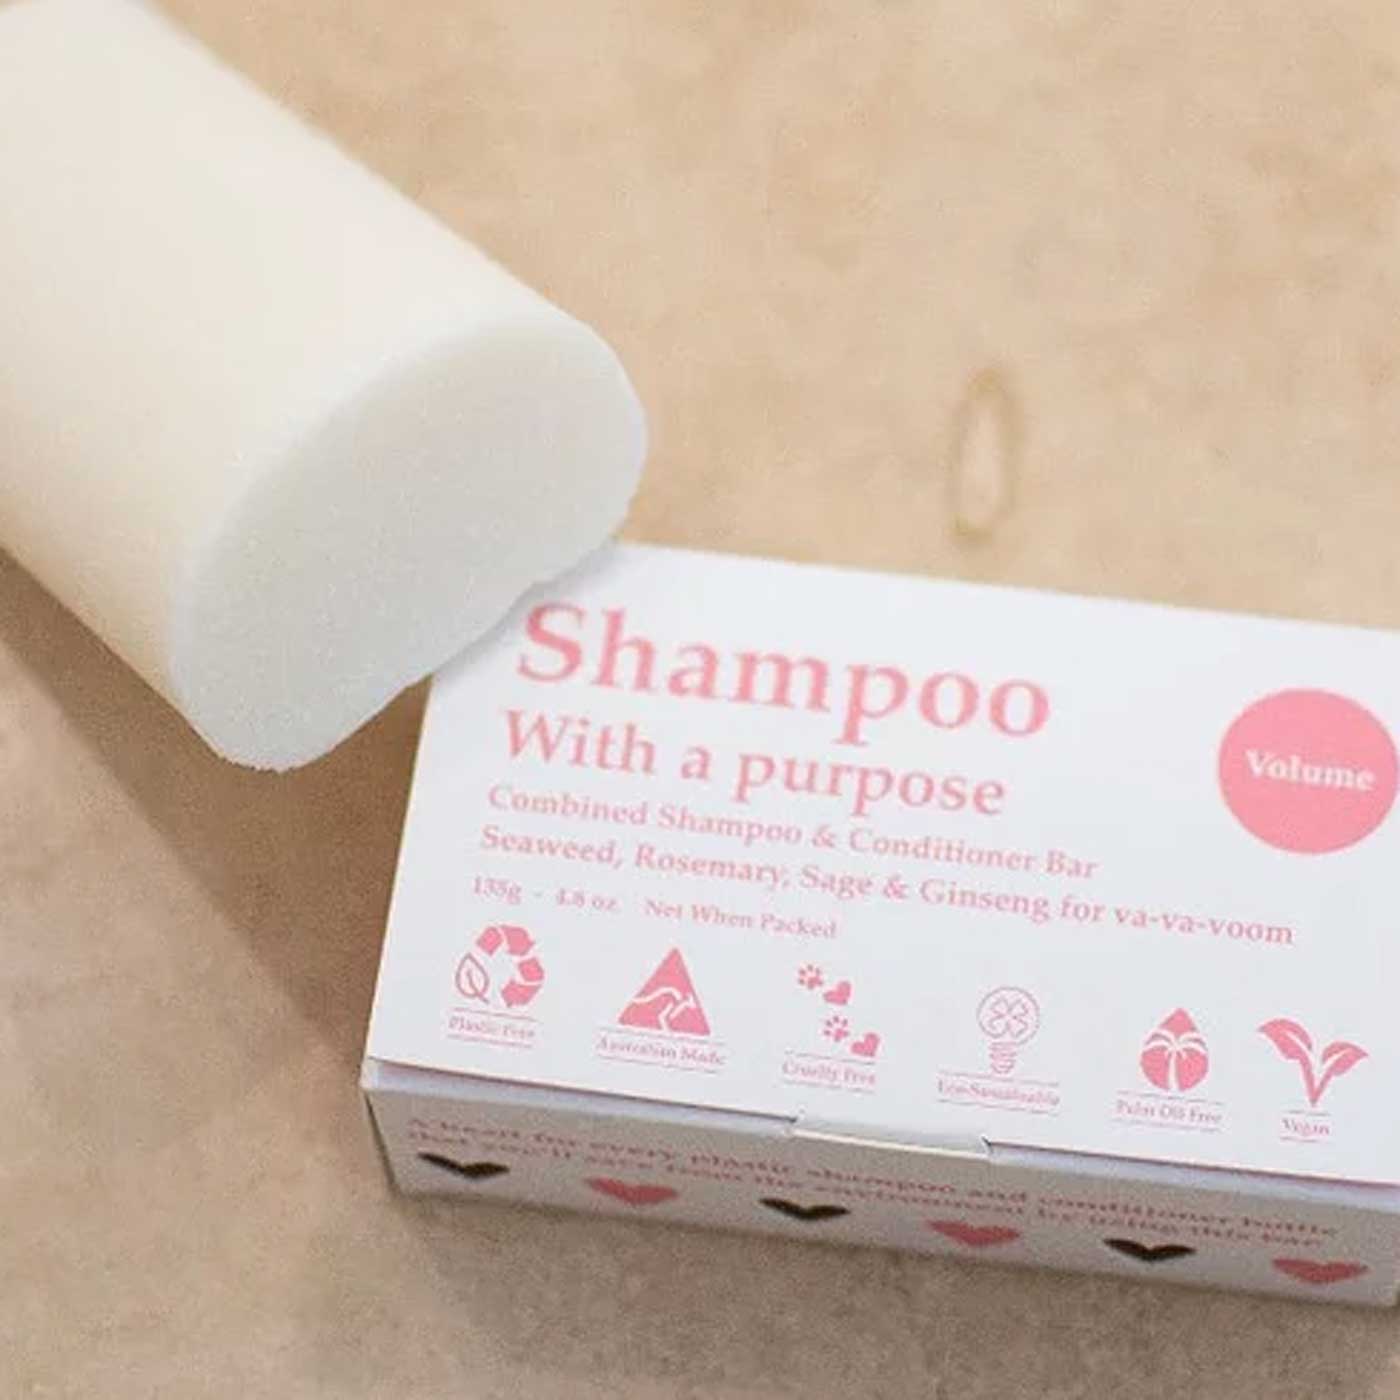 Load image into Gallery viewer, shampoo with a purpose vegan and shampoo and conditioner bar for volume. Adelaide plastic-free shop.
